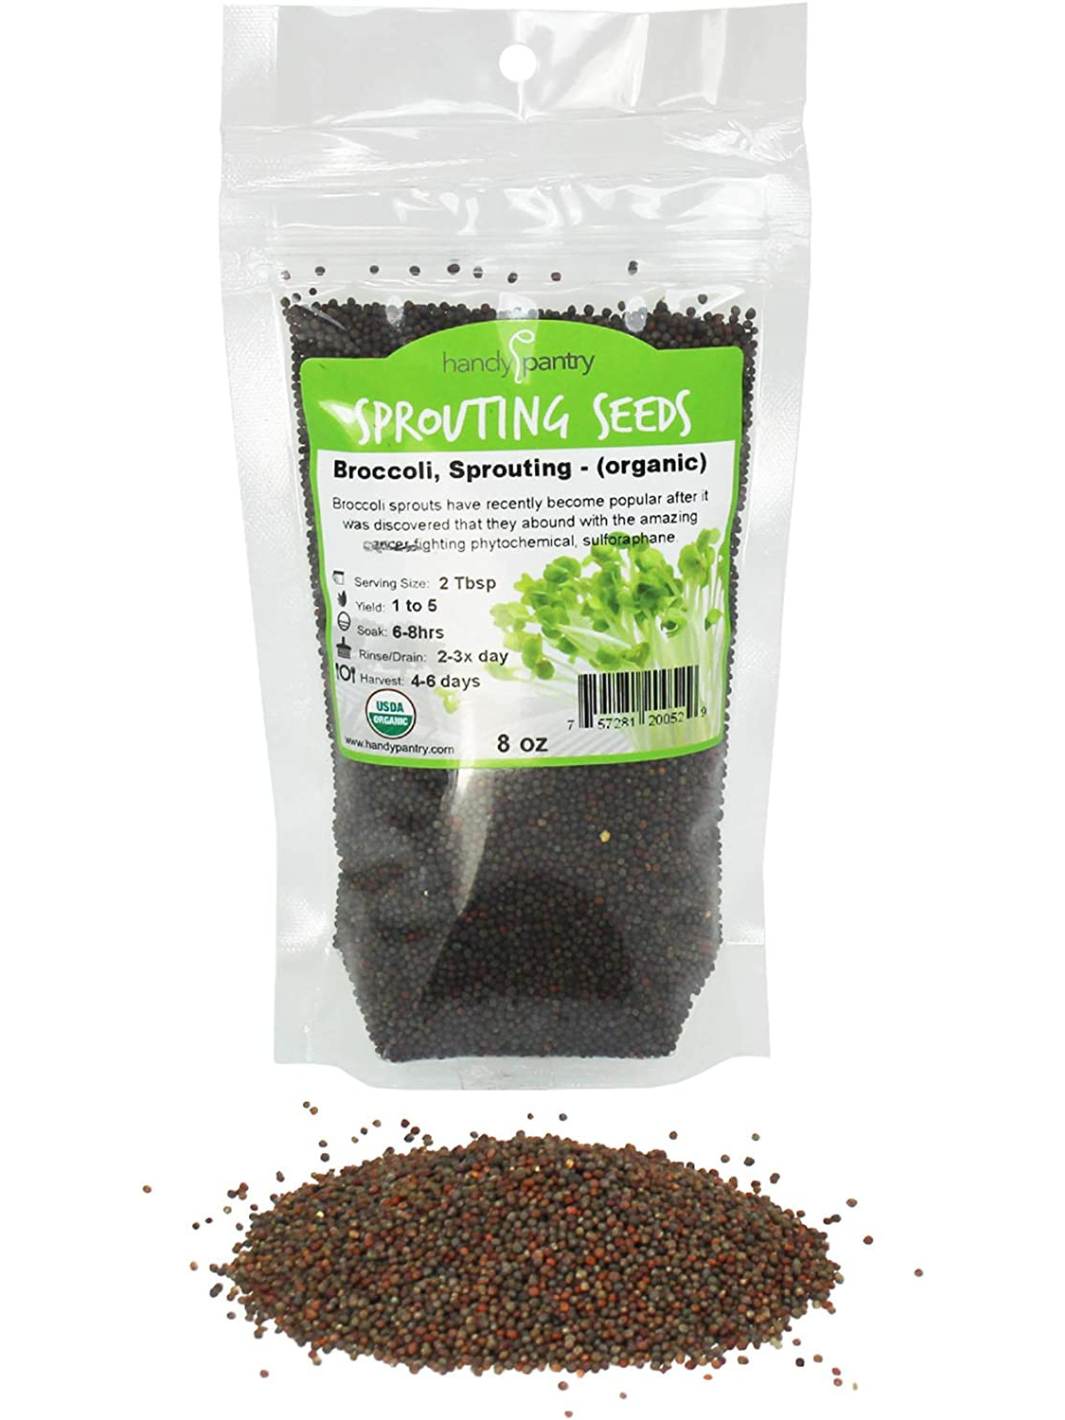 Organic Broccoli Seed for Sprouting in 8oz Package